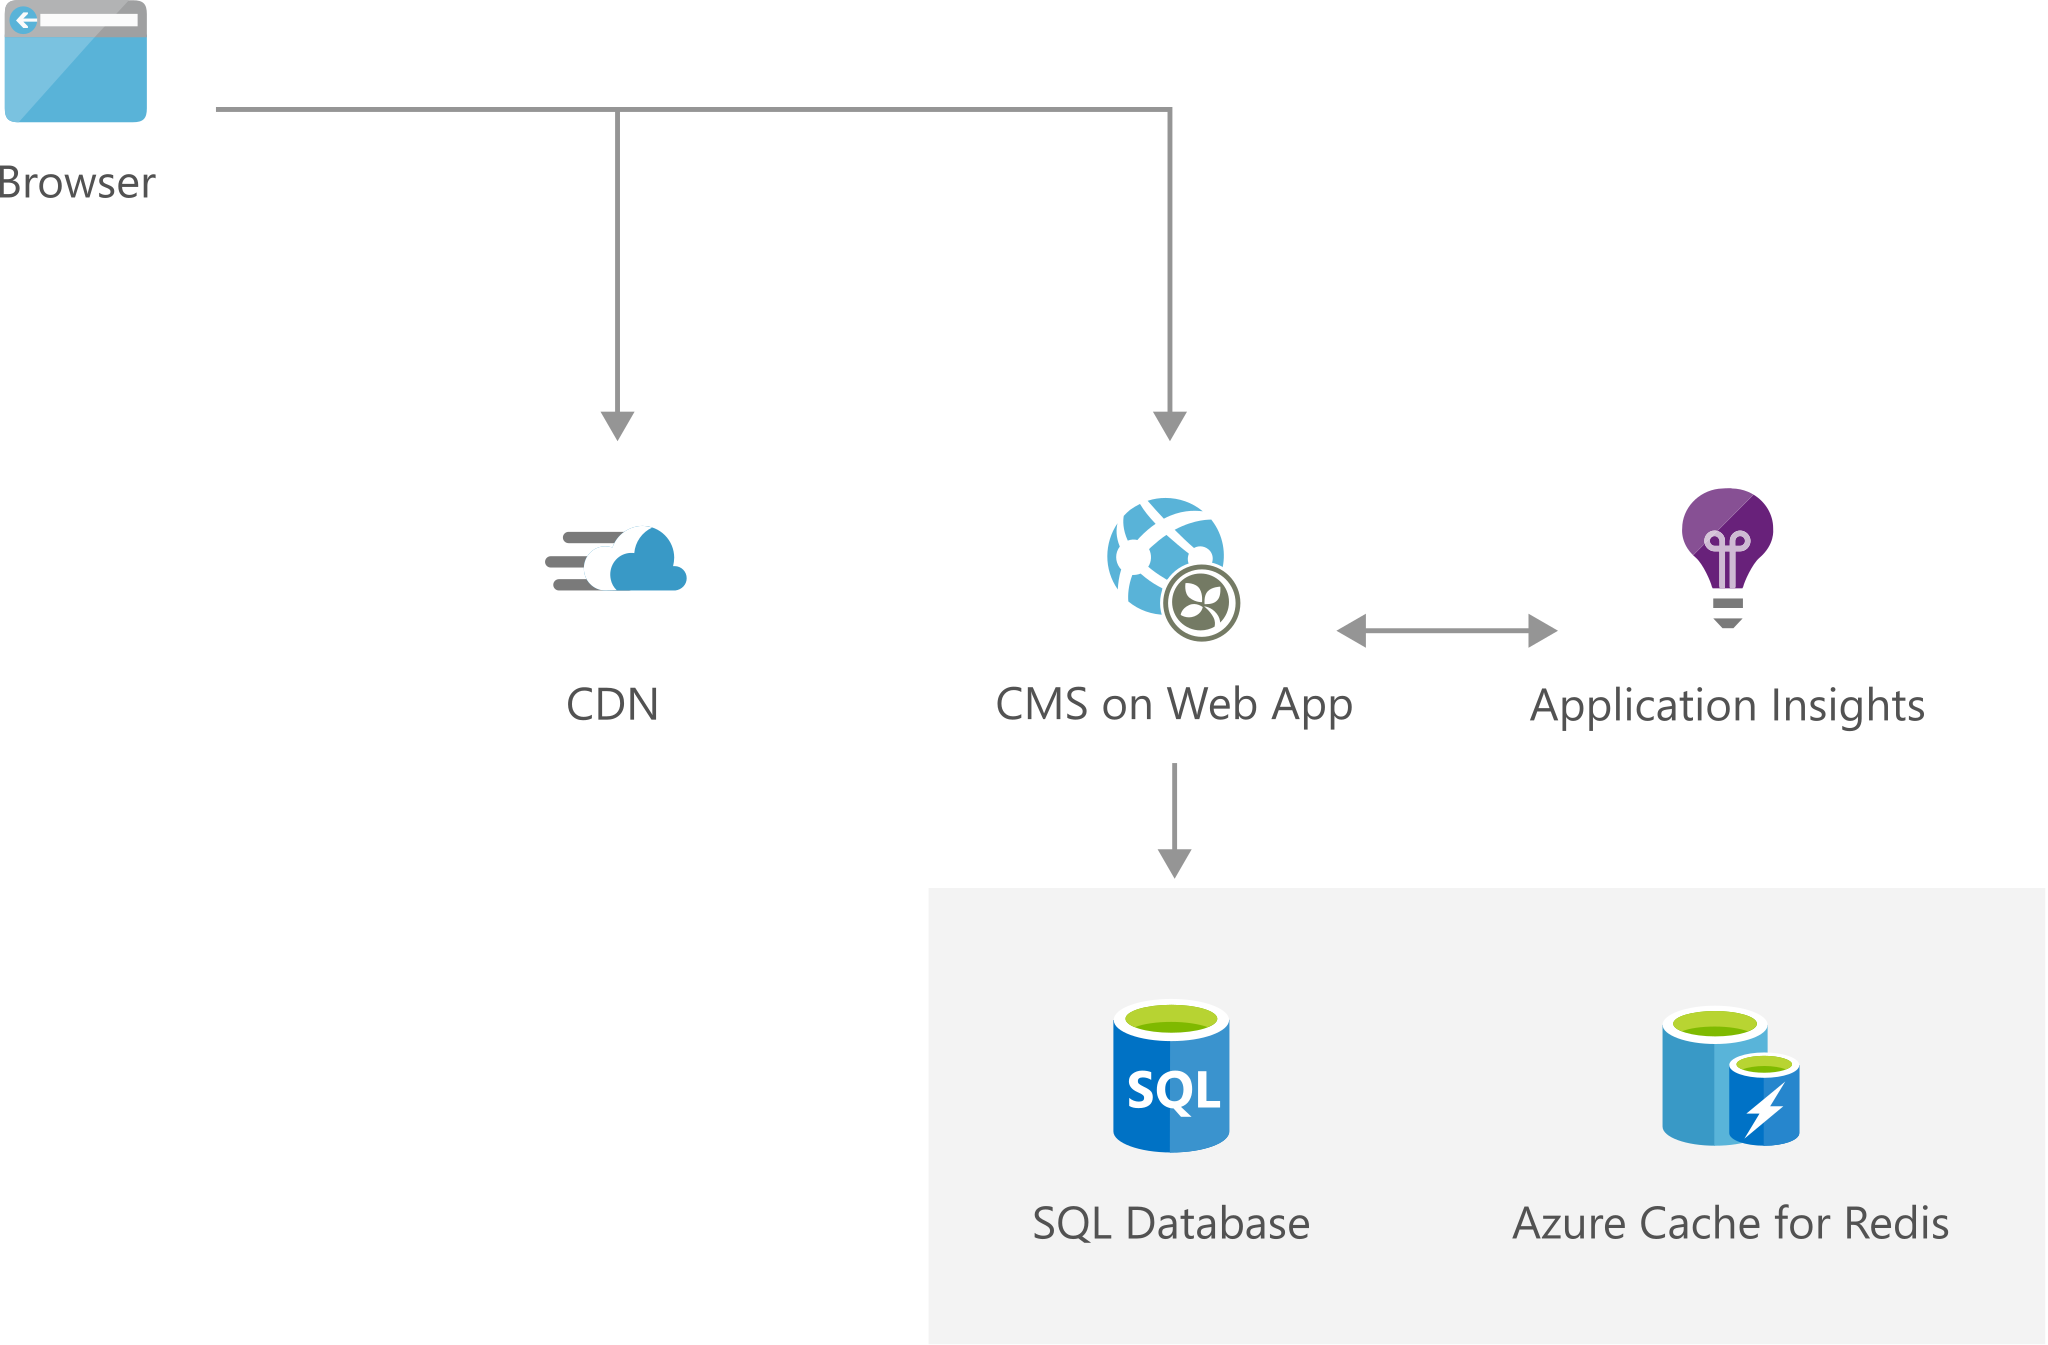 Architecture diagram show flow from the browser through C M S to databases and application insights.